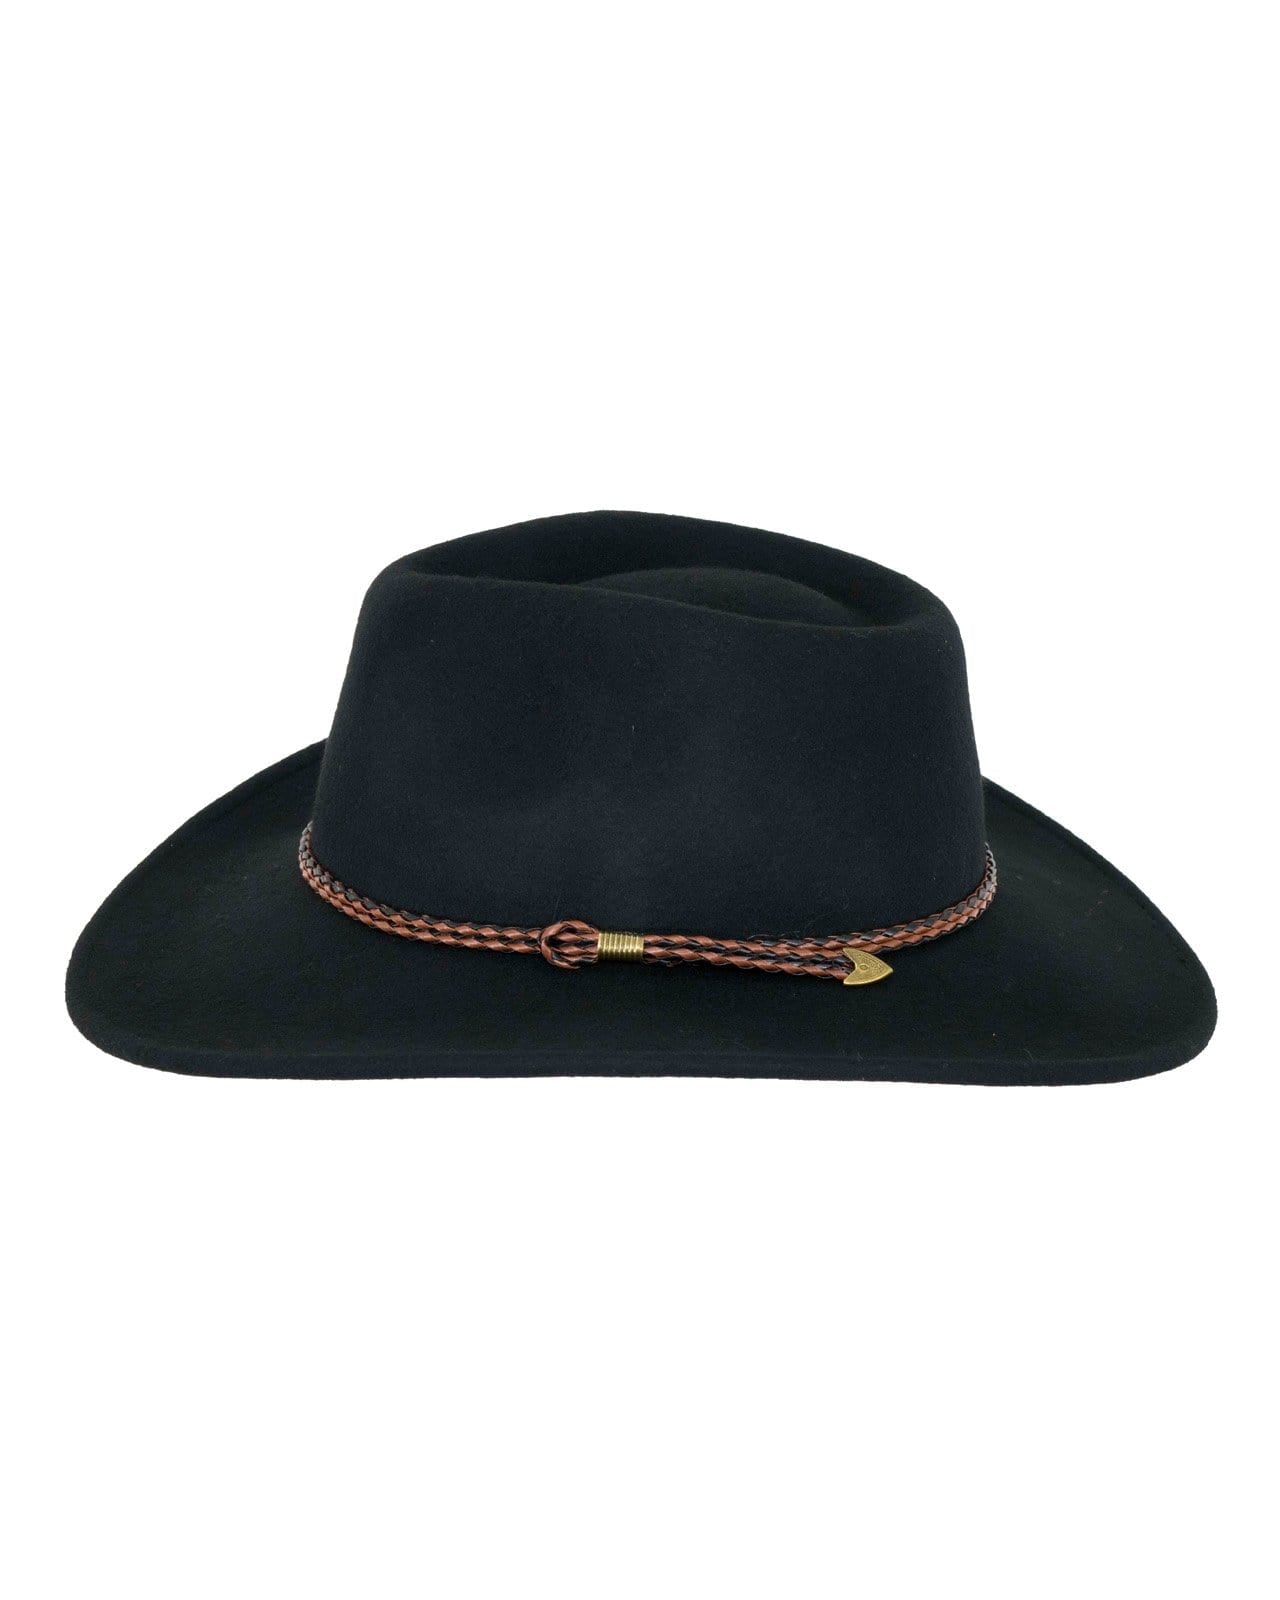 Outback Trading Company Broken Hill Hats